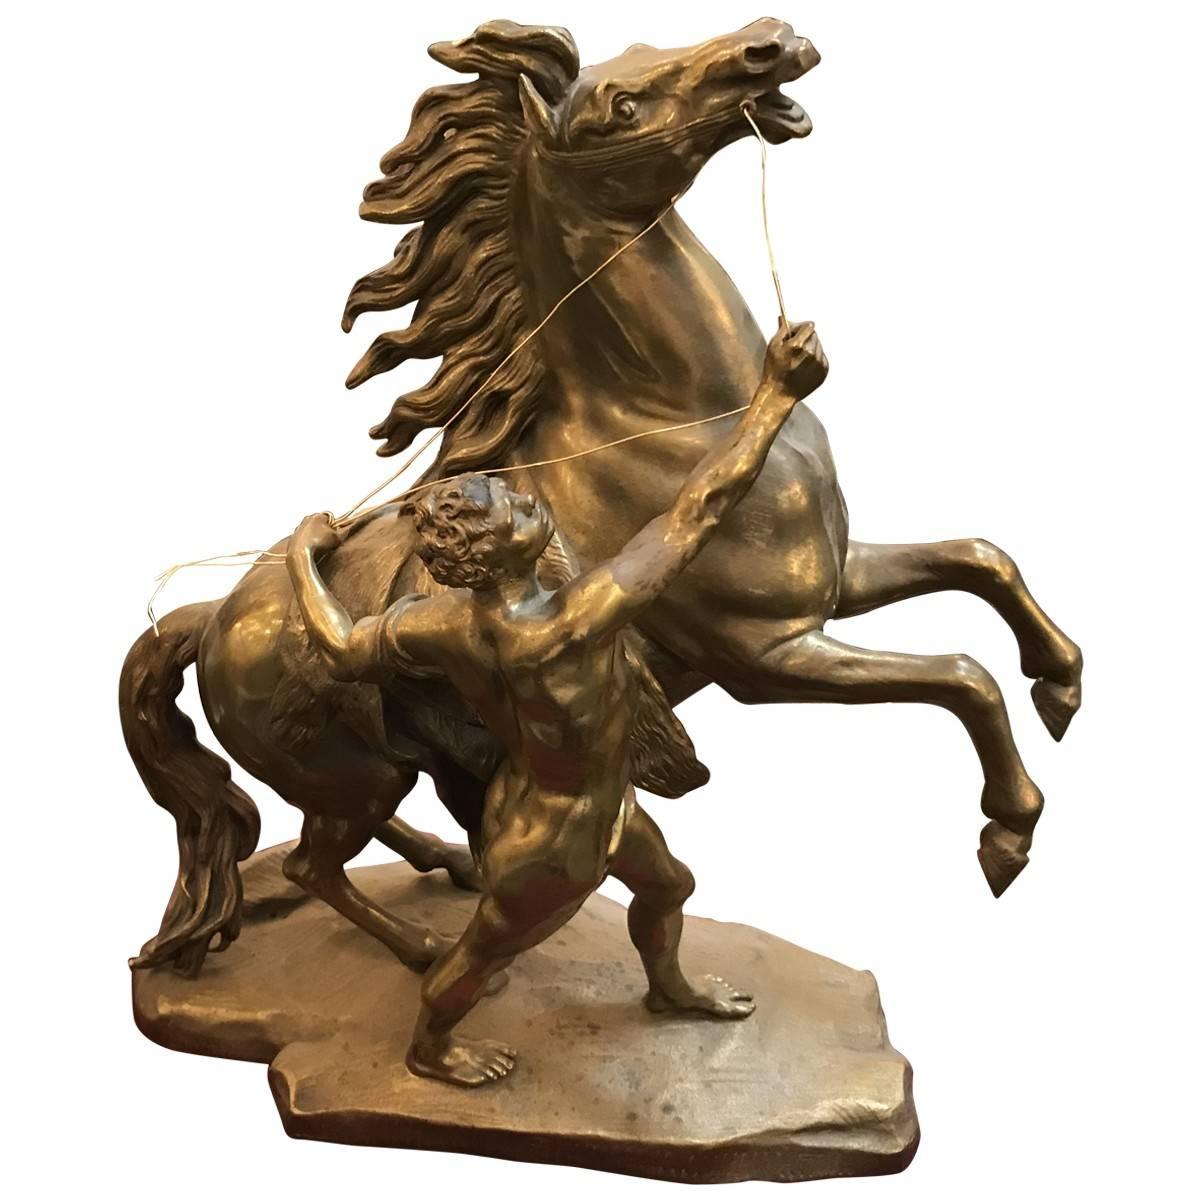 A collectible piece from bygone days, featuring the finest craftsmanship, materials, and design elements of its given era. Sleek and unique, this eye-catching pair of cast brass horses and figures features bronze wire reins. These artful sculptures